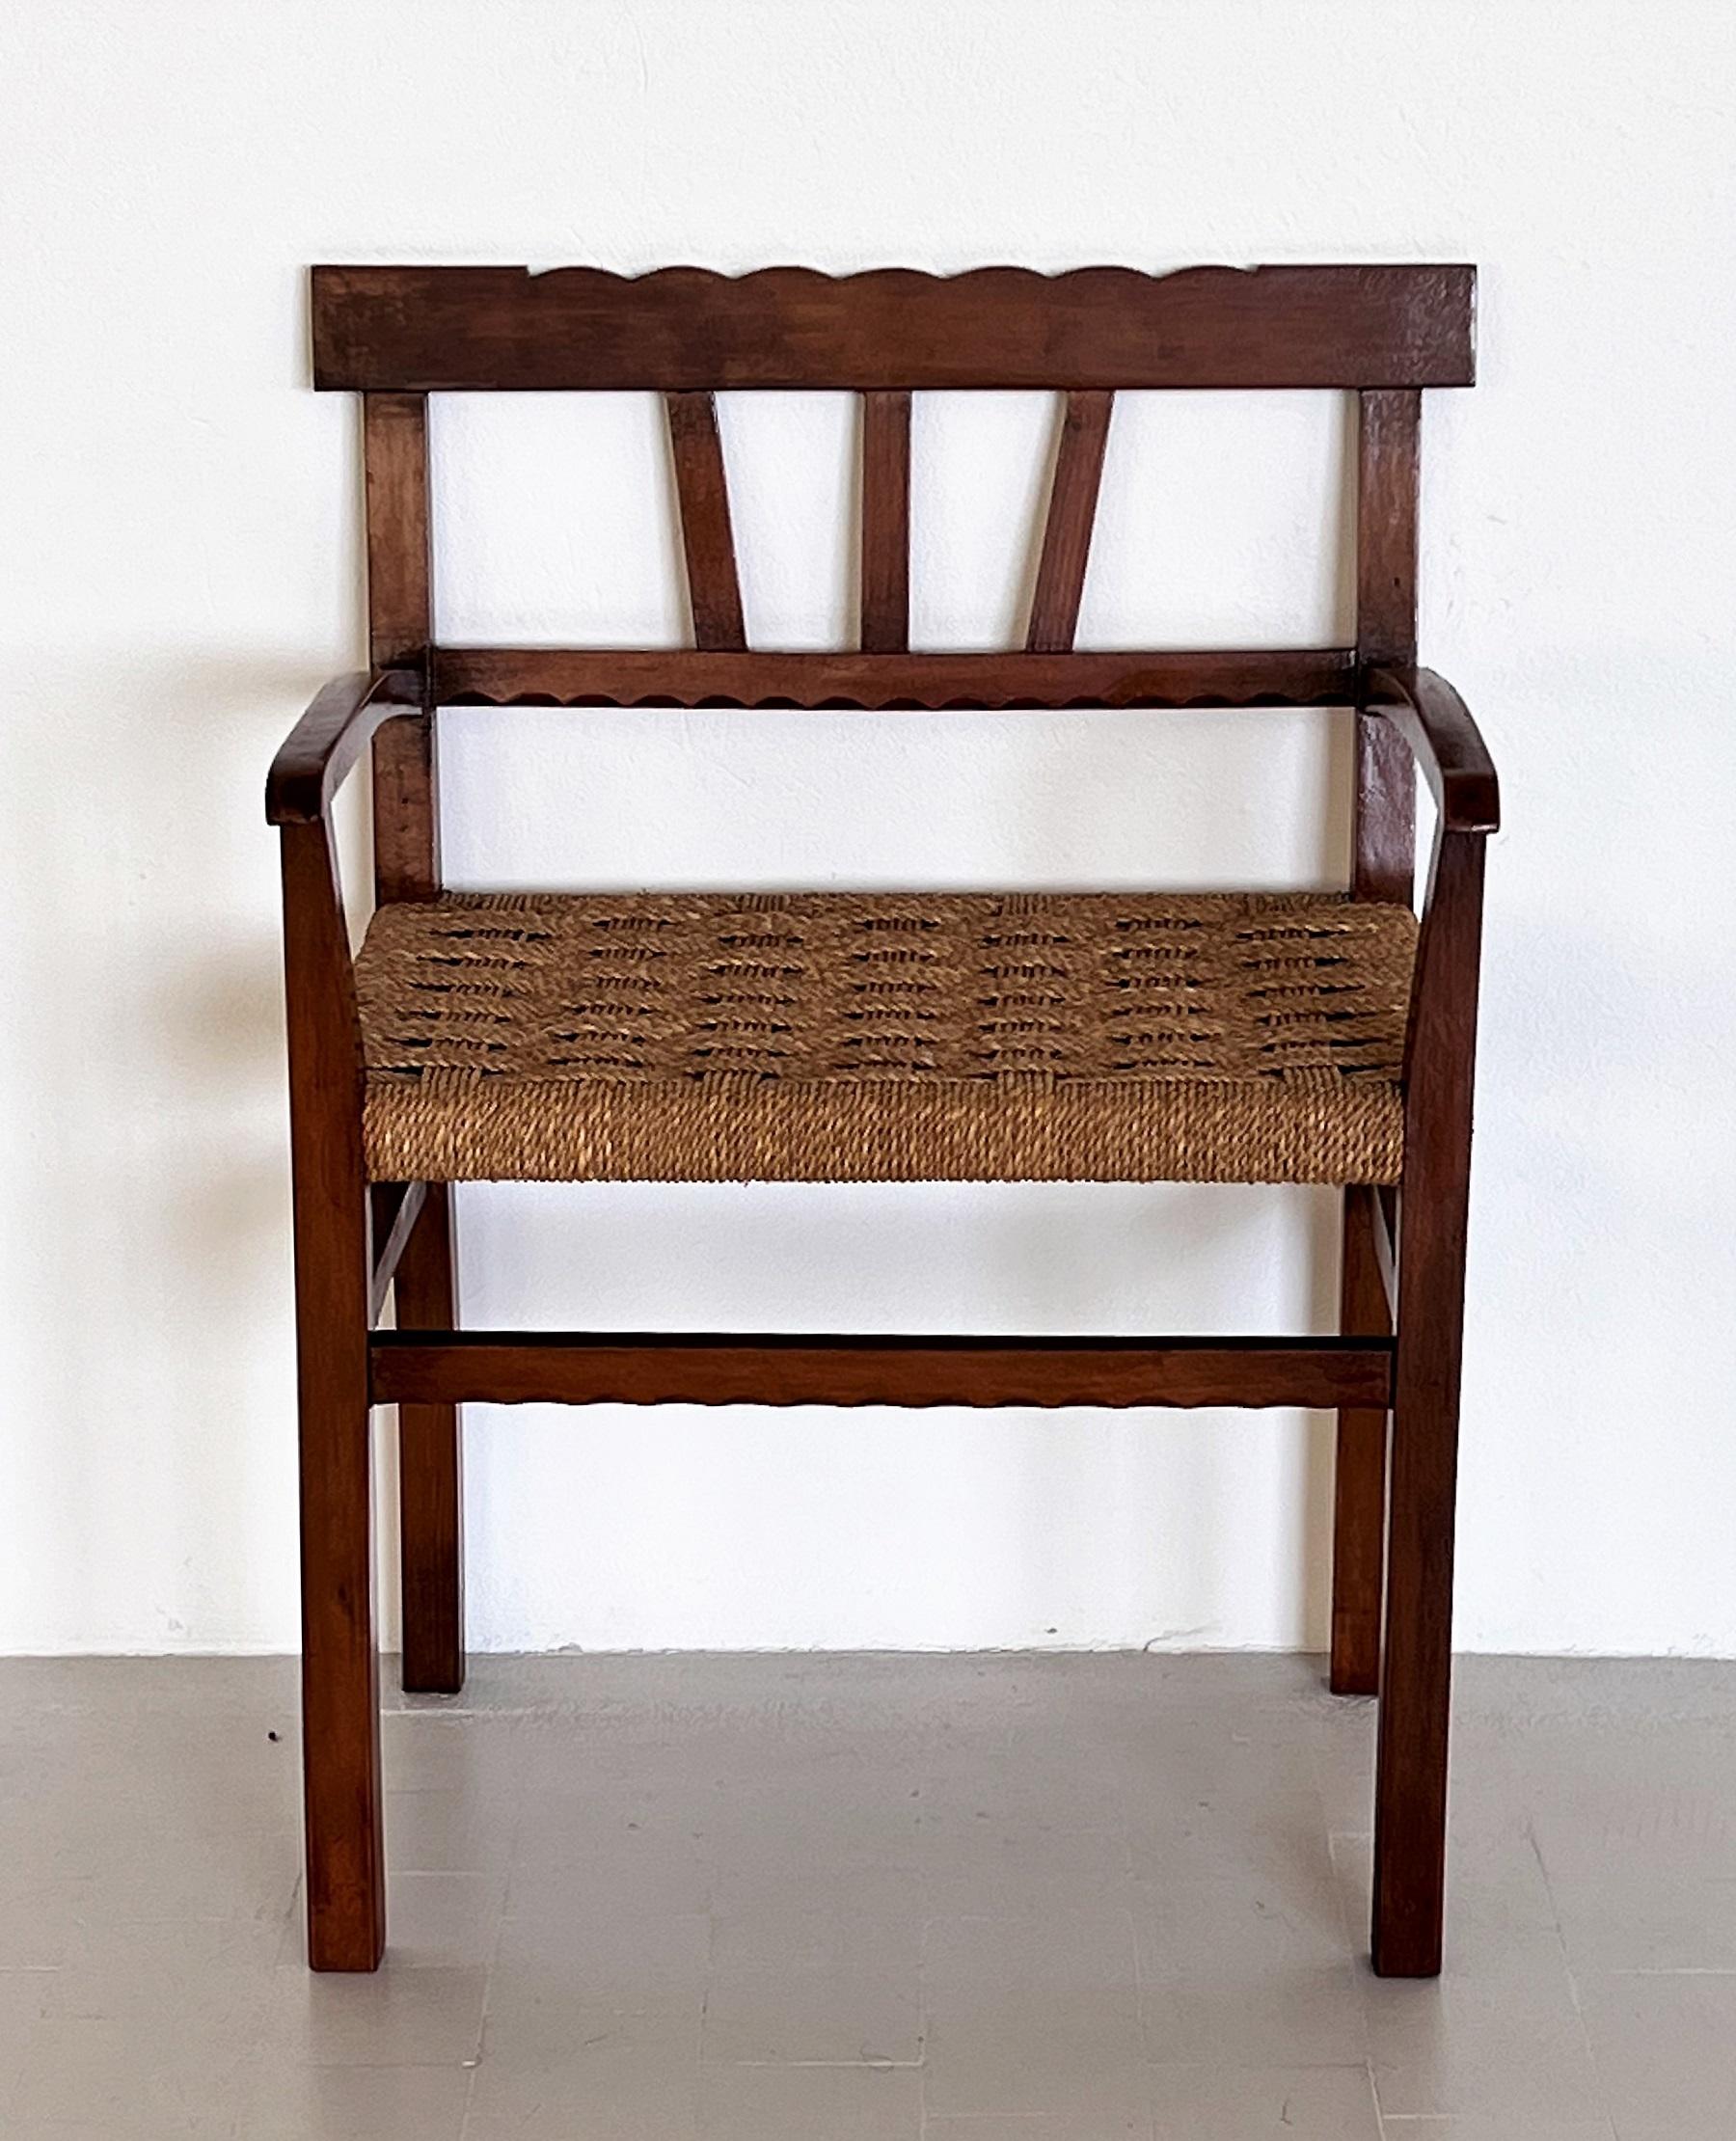 Beautiful side chair made of colored beech wood with hand-woven seat made of strong cord.
Made in Italy in the 1980s.
The side chair is quite wide, which makes it very comfortable. Furthermore, it can be used very well as a storage for clothes bags,